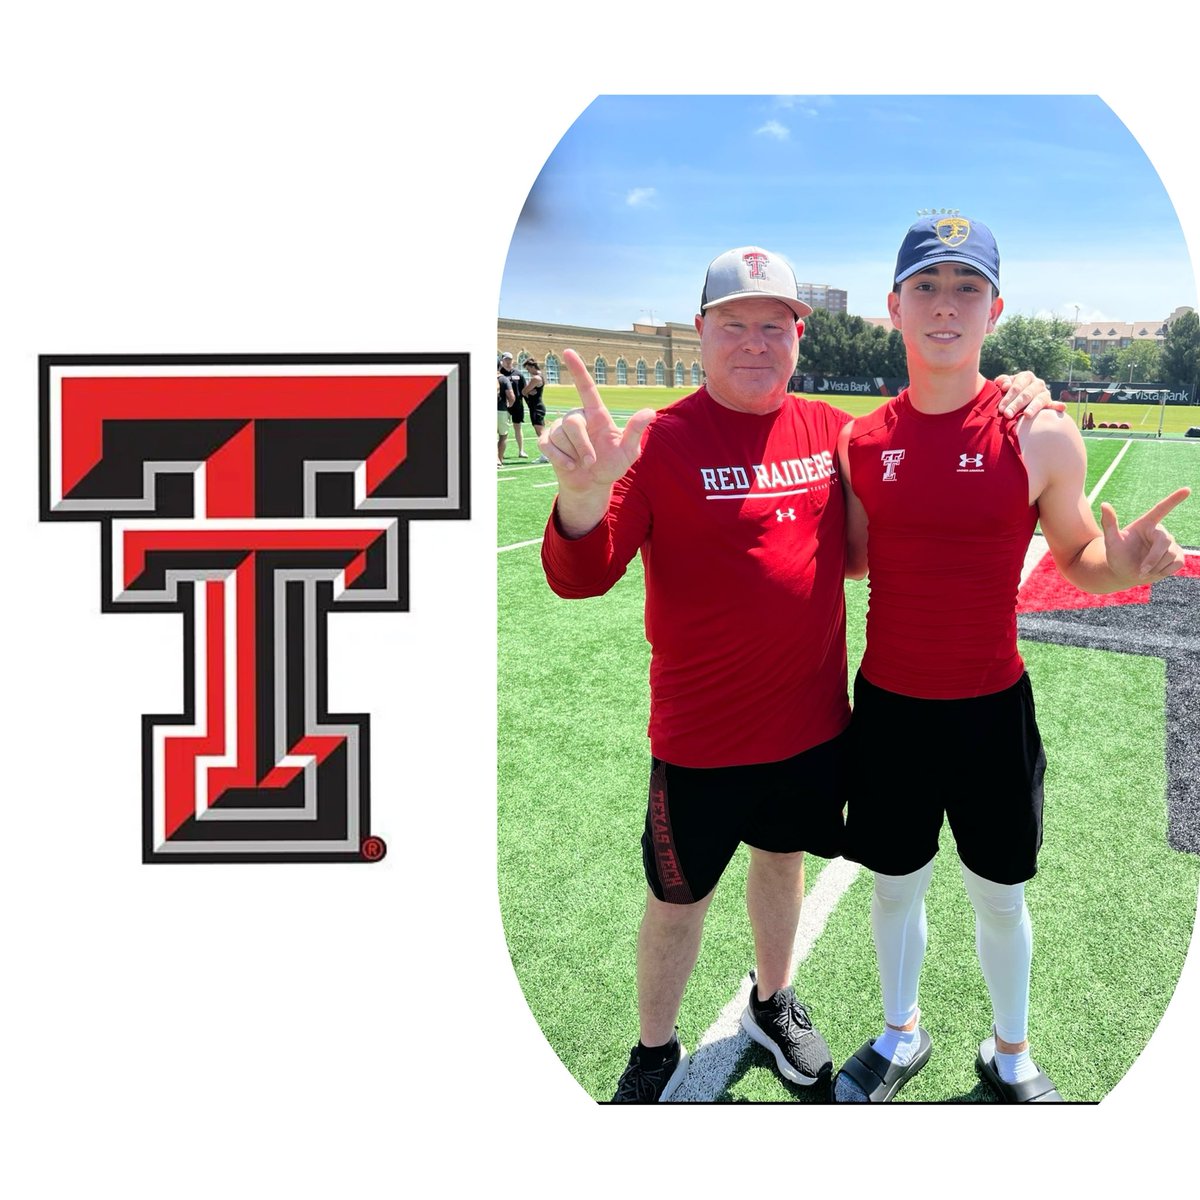 Excited to be at @TexasTechFB April 13 for a spring practice @CoachKennyPerry @DawsonEagleFB @RecruitTheNest @DawsonHighSchl @hershbrothersk1 @HKA_Tanalski @Chris_Sailer